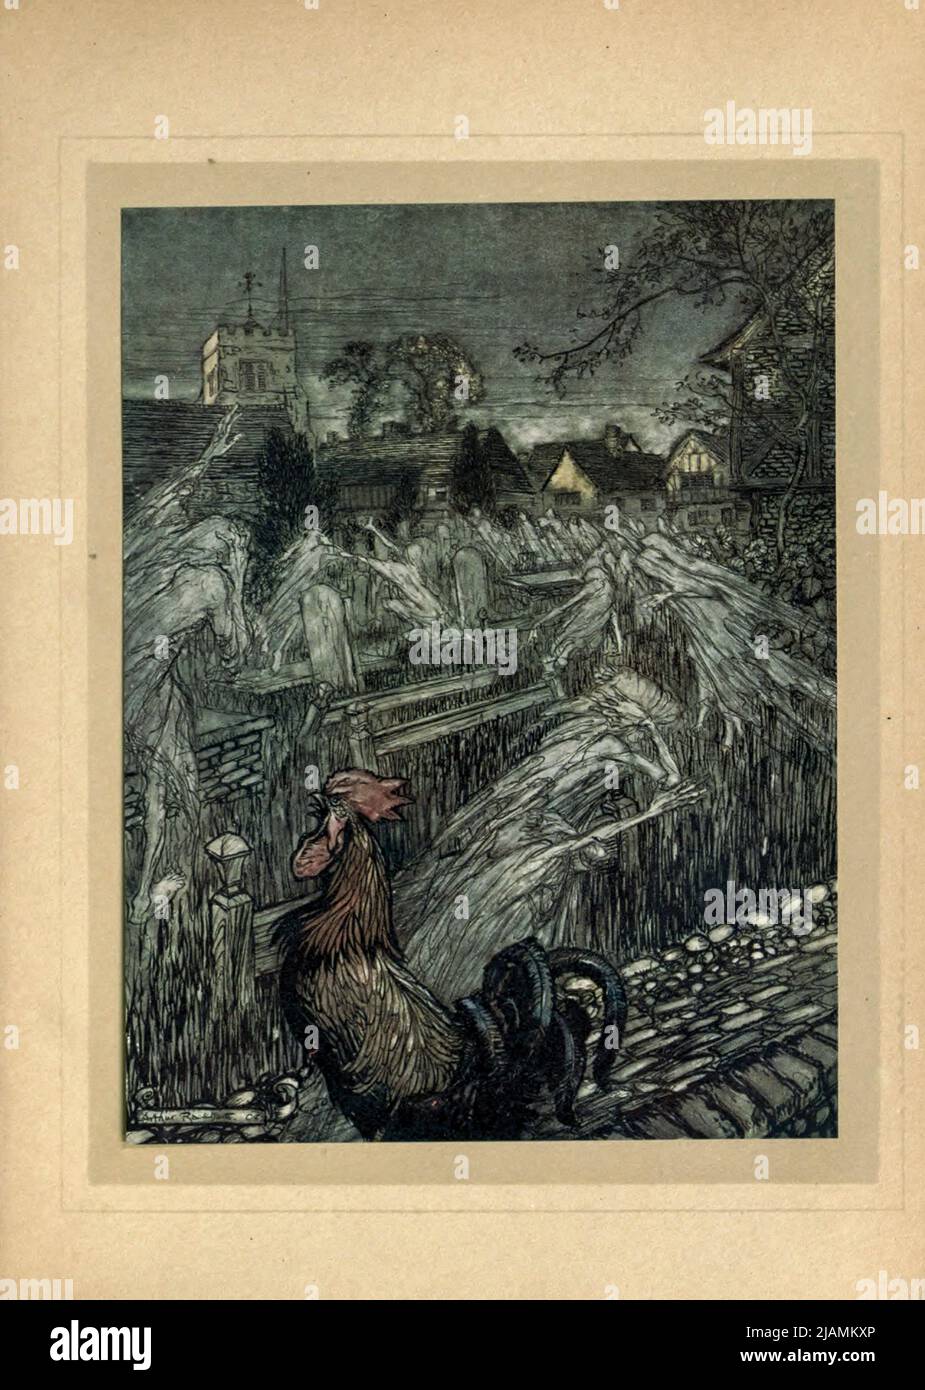 ghosts, wandering here and there, Troop home to churchyards from ' A midsummer night's dream ' by William Shakespeare, 1564-1616; Illustrated by Arthur Rackham, 1867-1939 Publication date 1908 Publisher London, Heinemann; New York, Doubleday, Page & Co Stock Photo